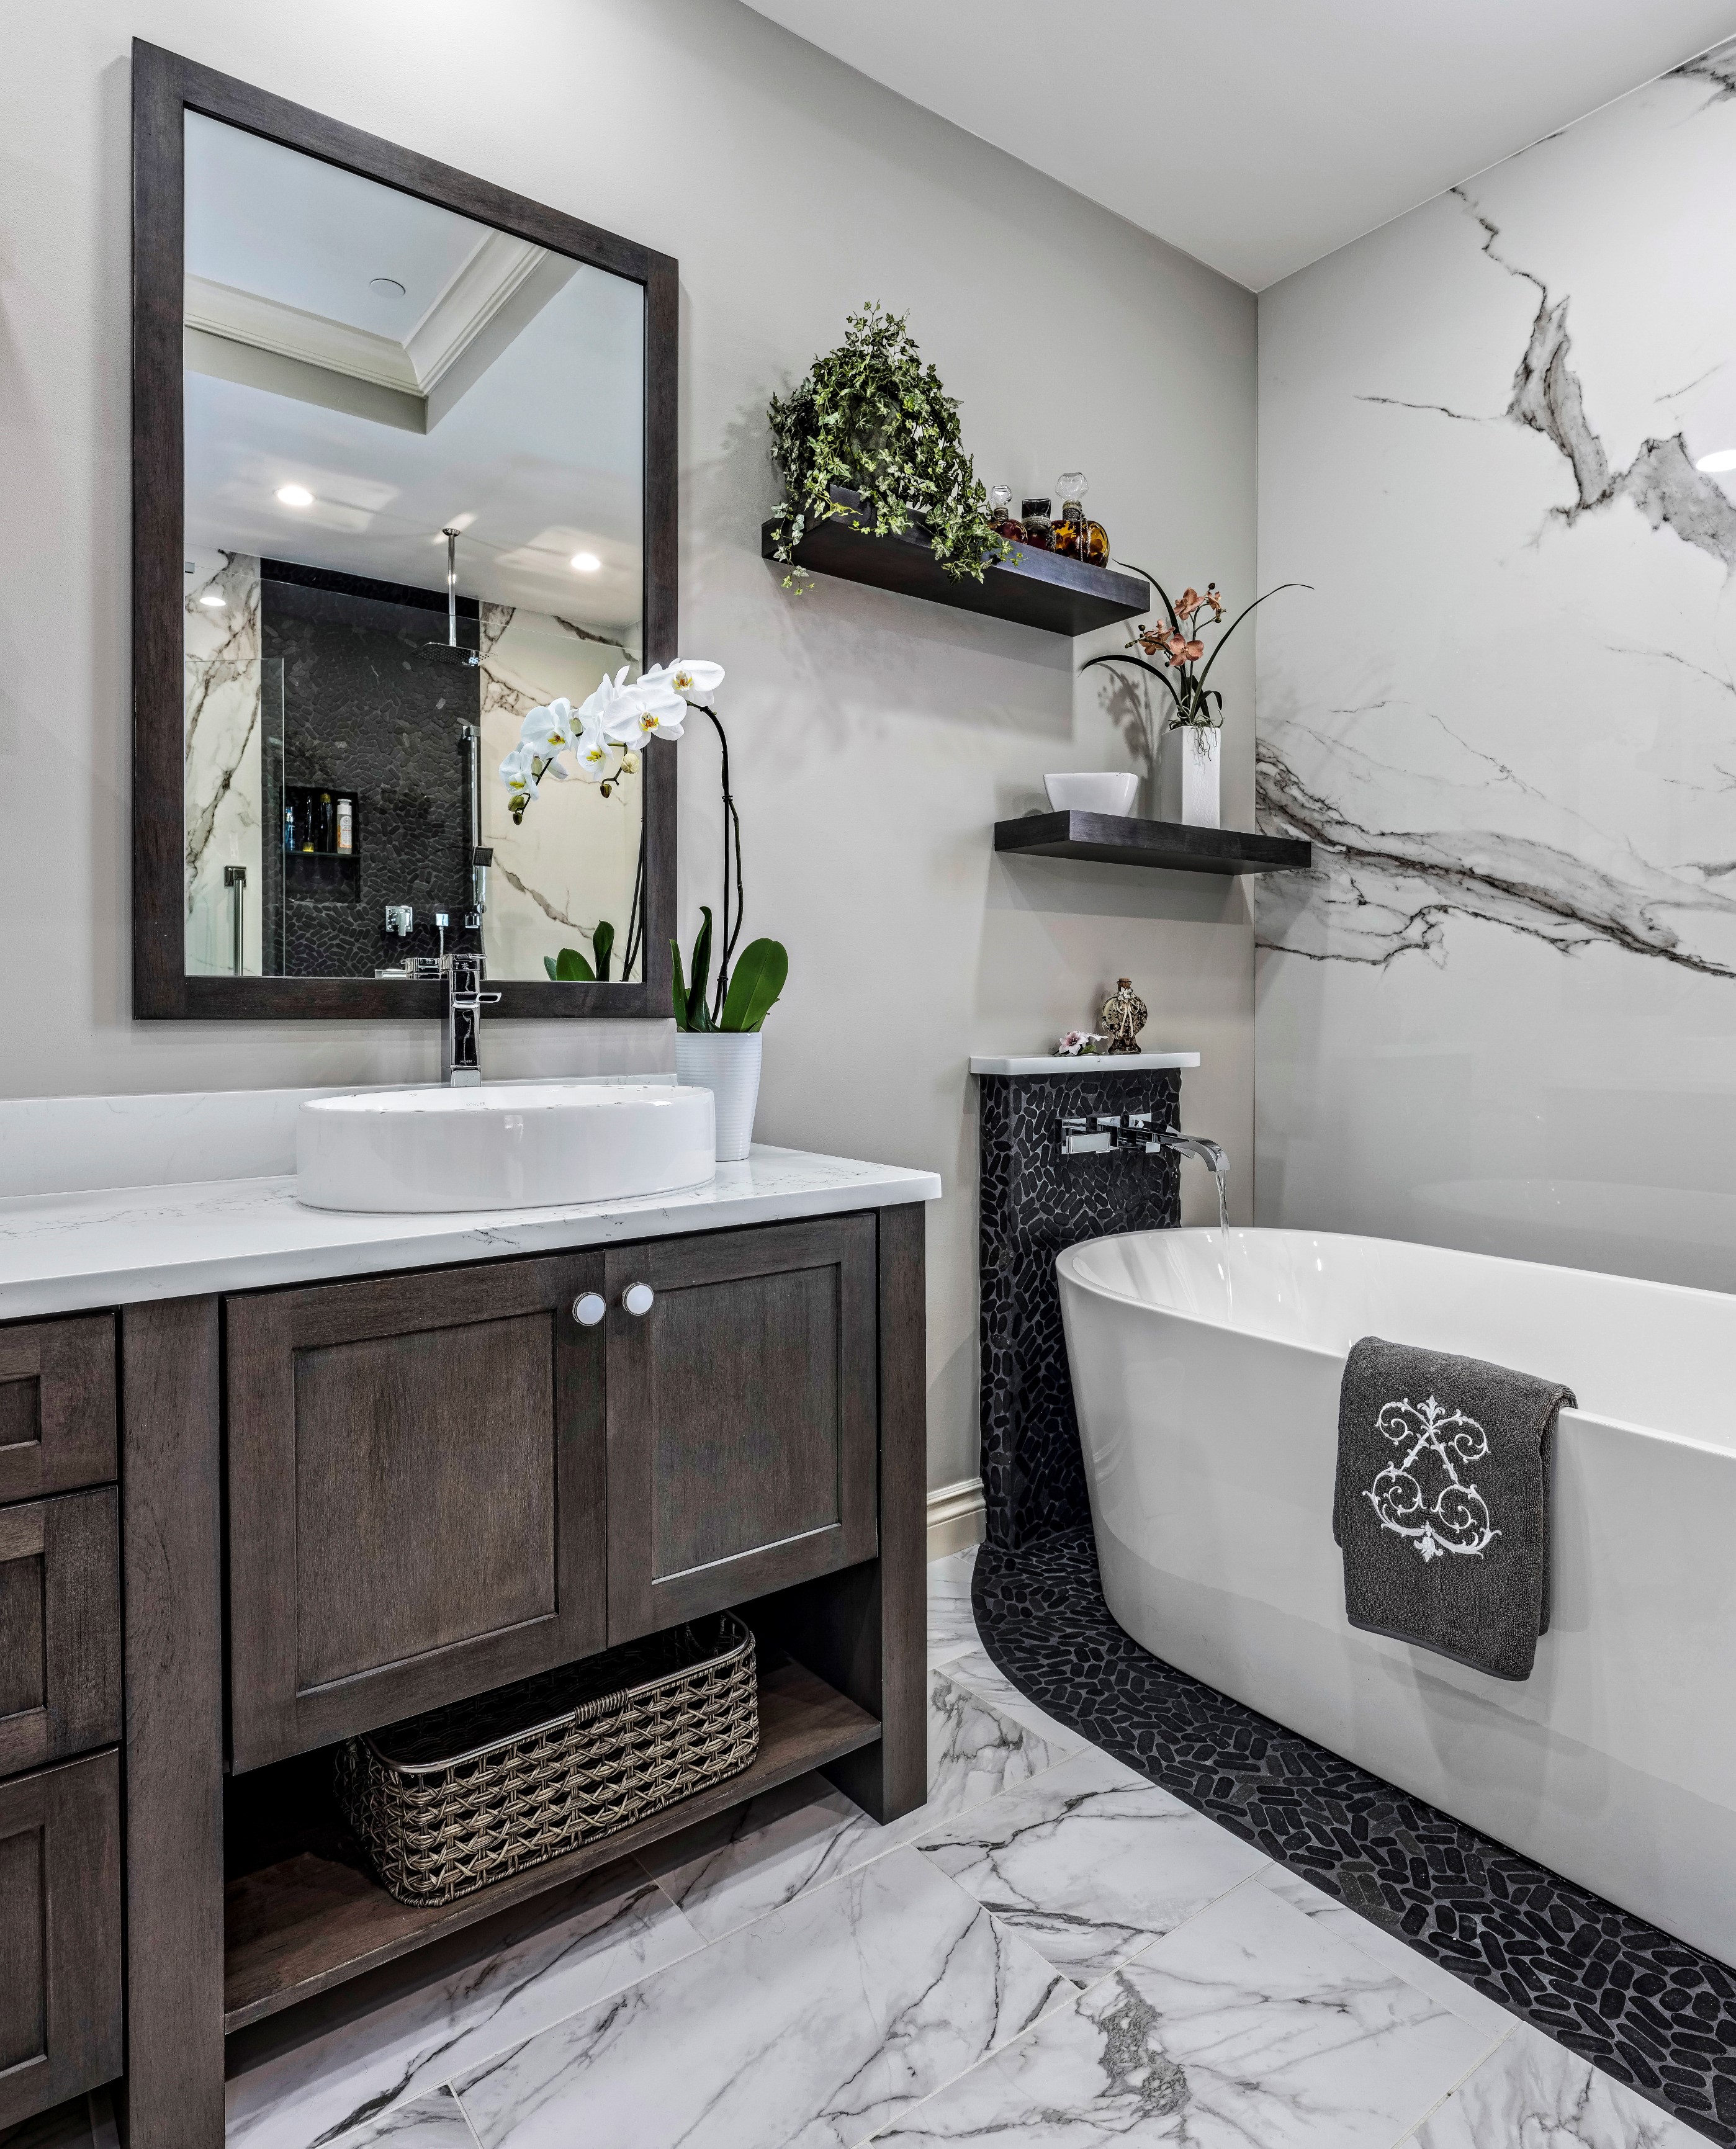 Bathroom Remodeling Typically Cost, How Much Should You Budget For A Bathroom Remodel